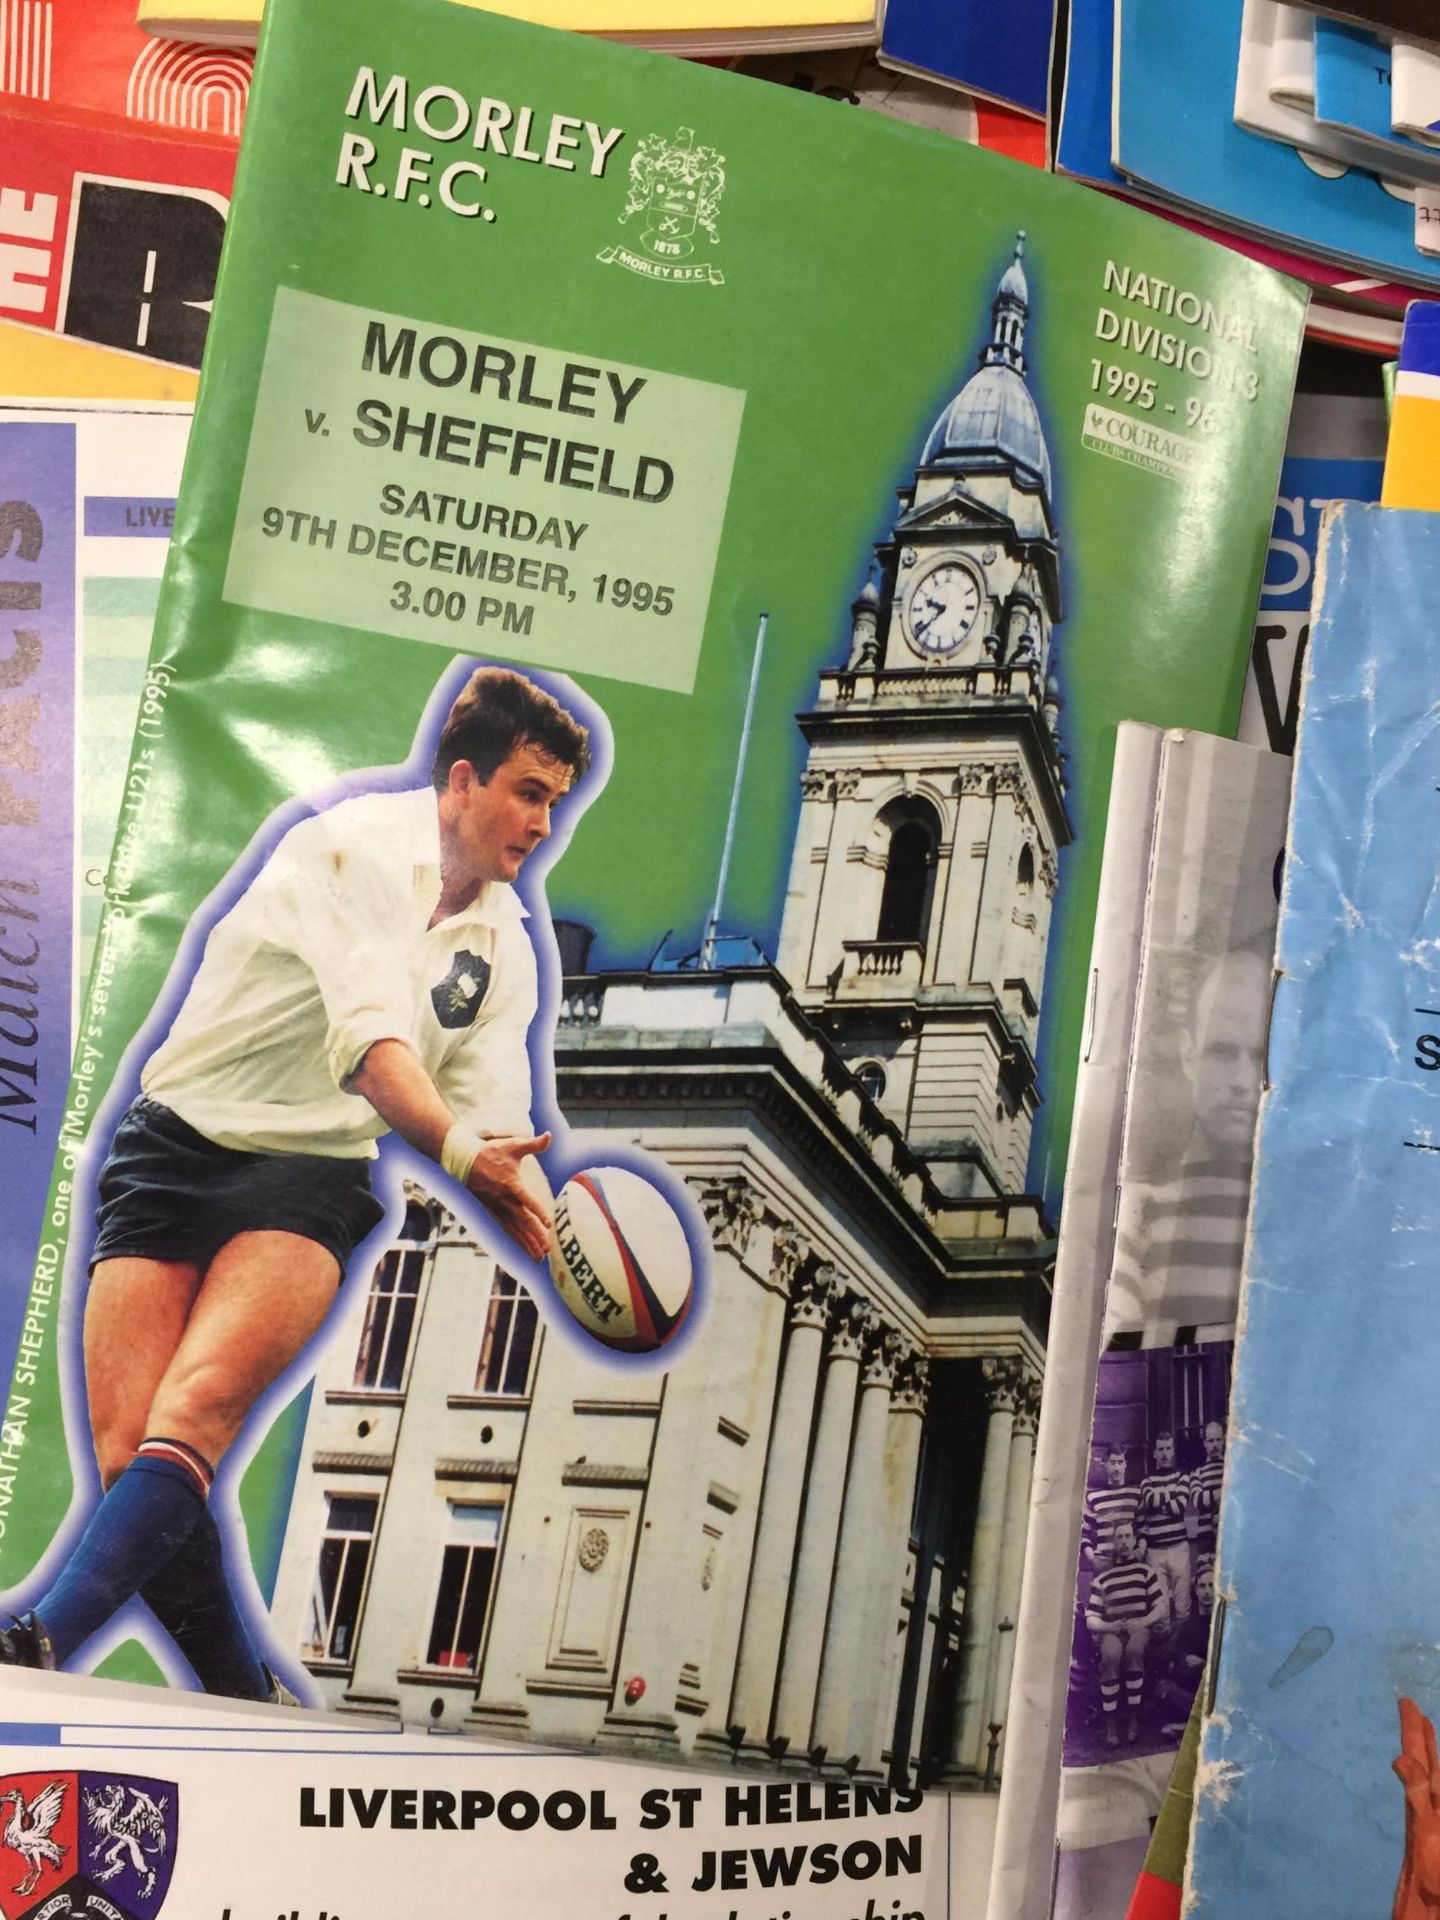 VARIOUS LOCAL AND NATIONAL TEAMS RUGBY UNION/FOOTBALL PROGRAMMES FROM 80'S AND 90'S - Image 3 of 6